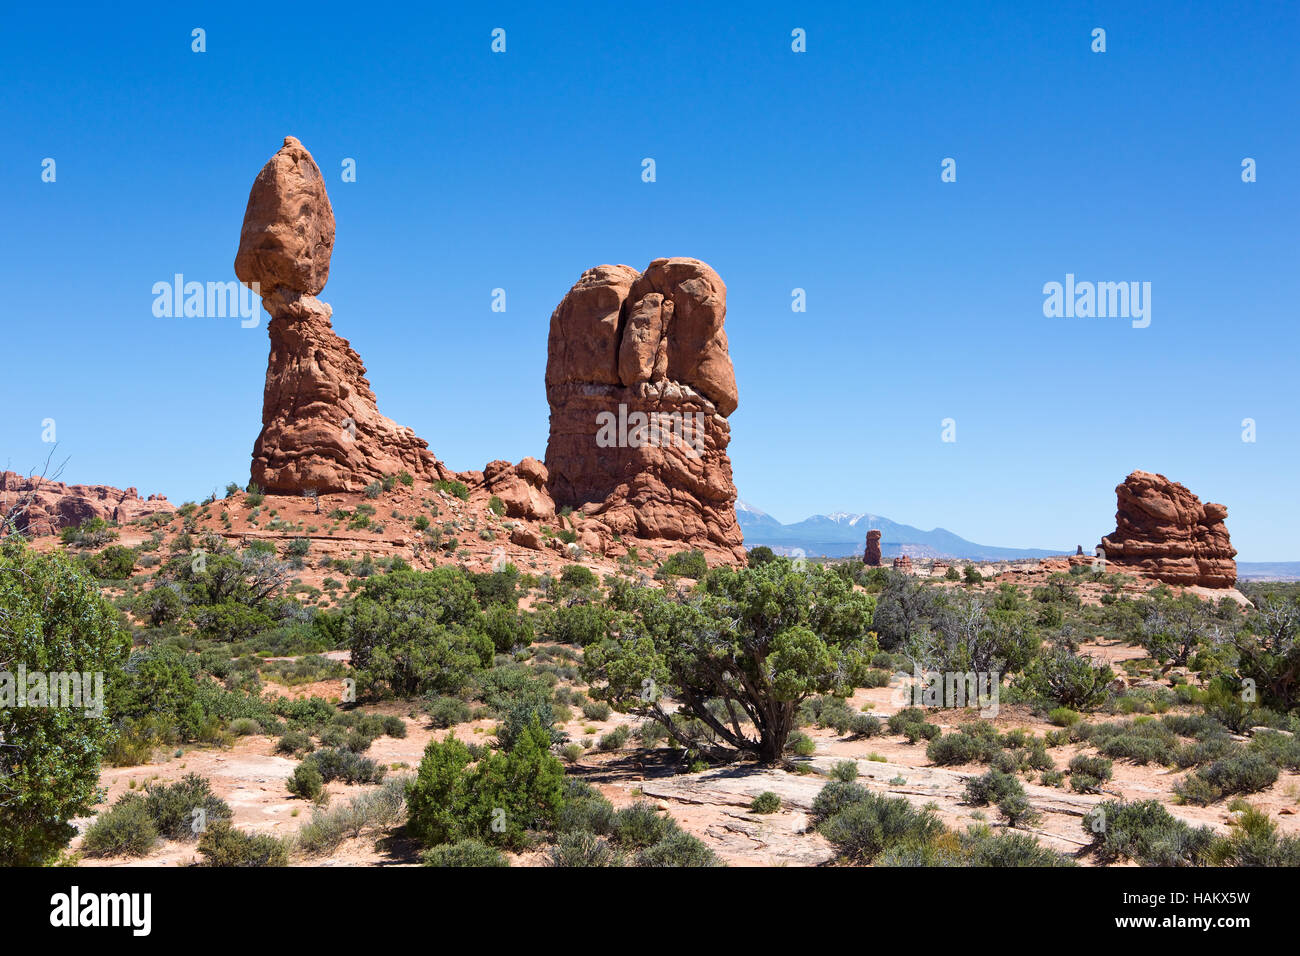 Balanced Rock is a sandstone rock formation located in Arches National Park, Utah, USA. Stock Photo